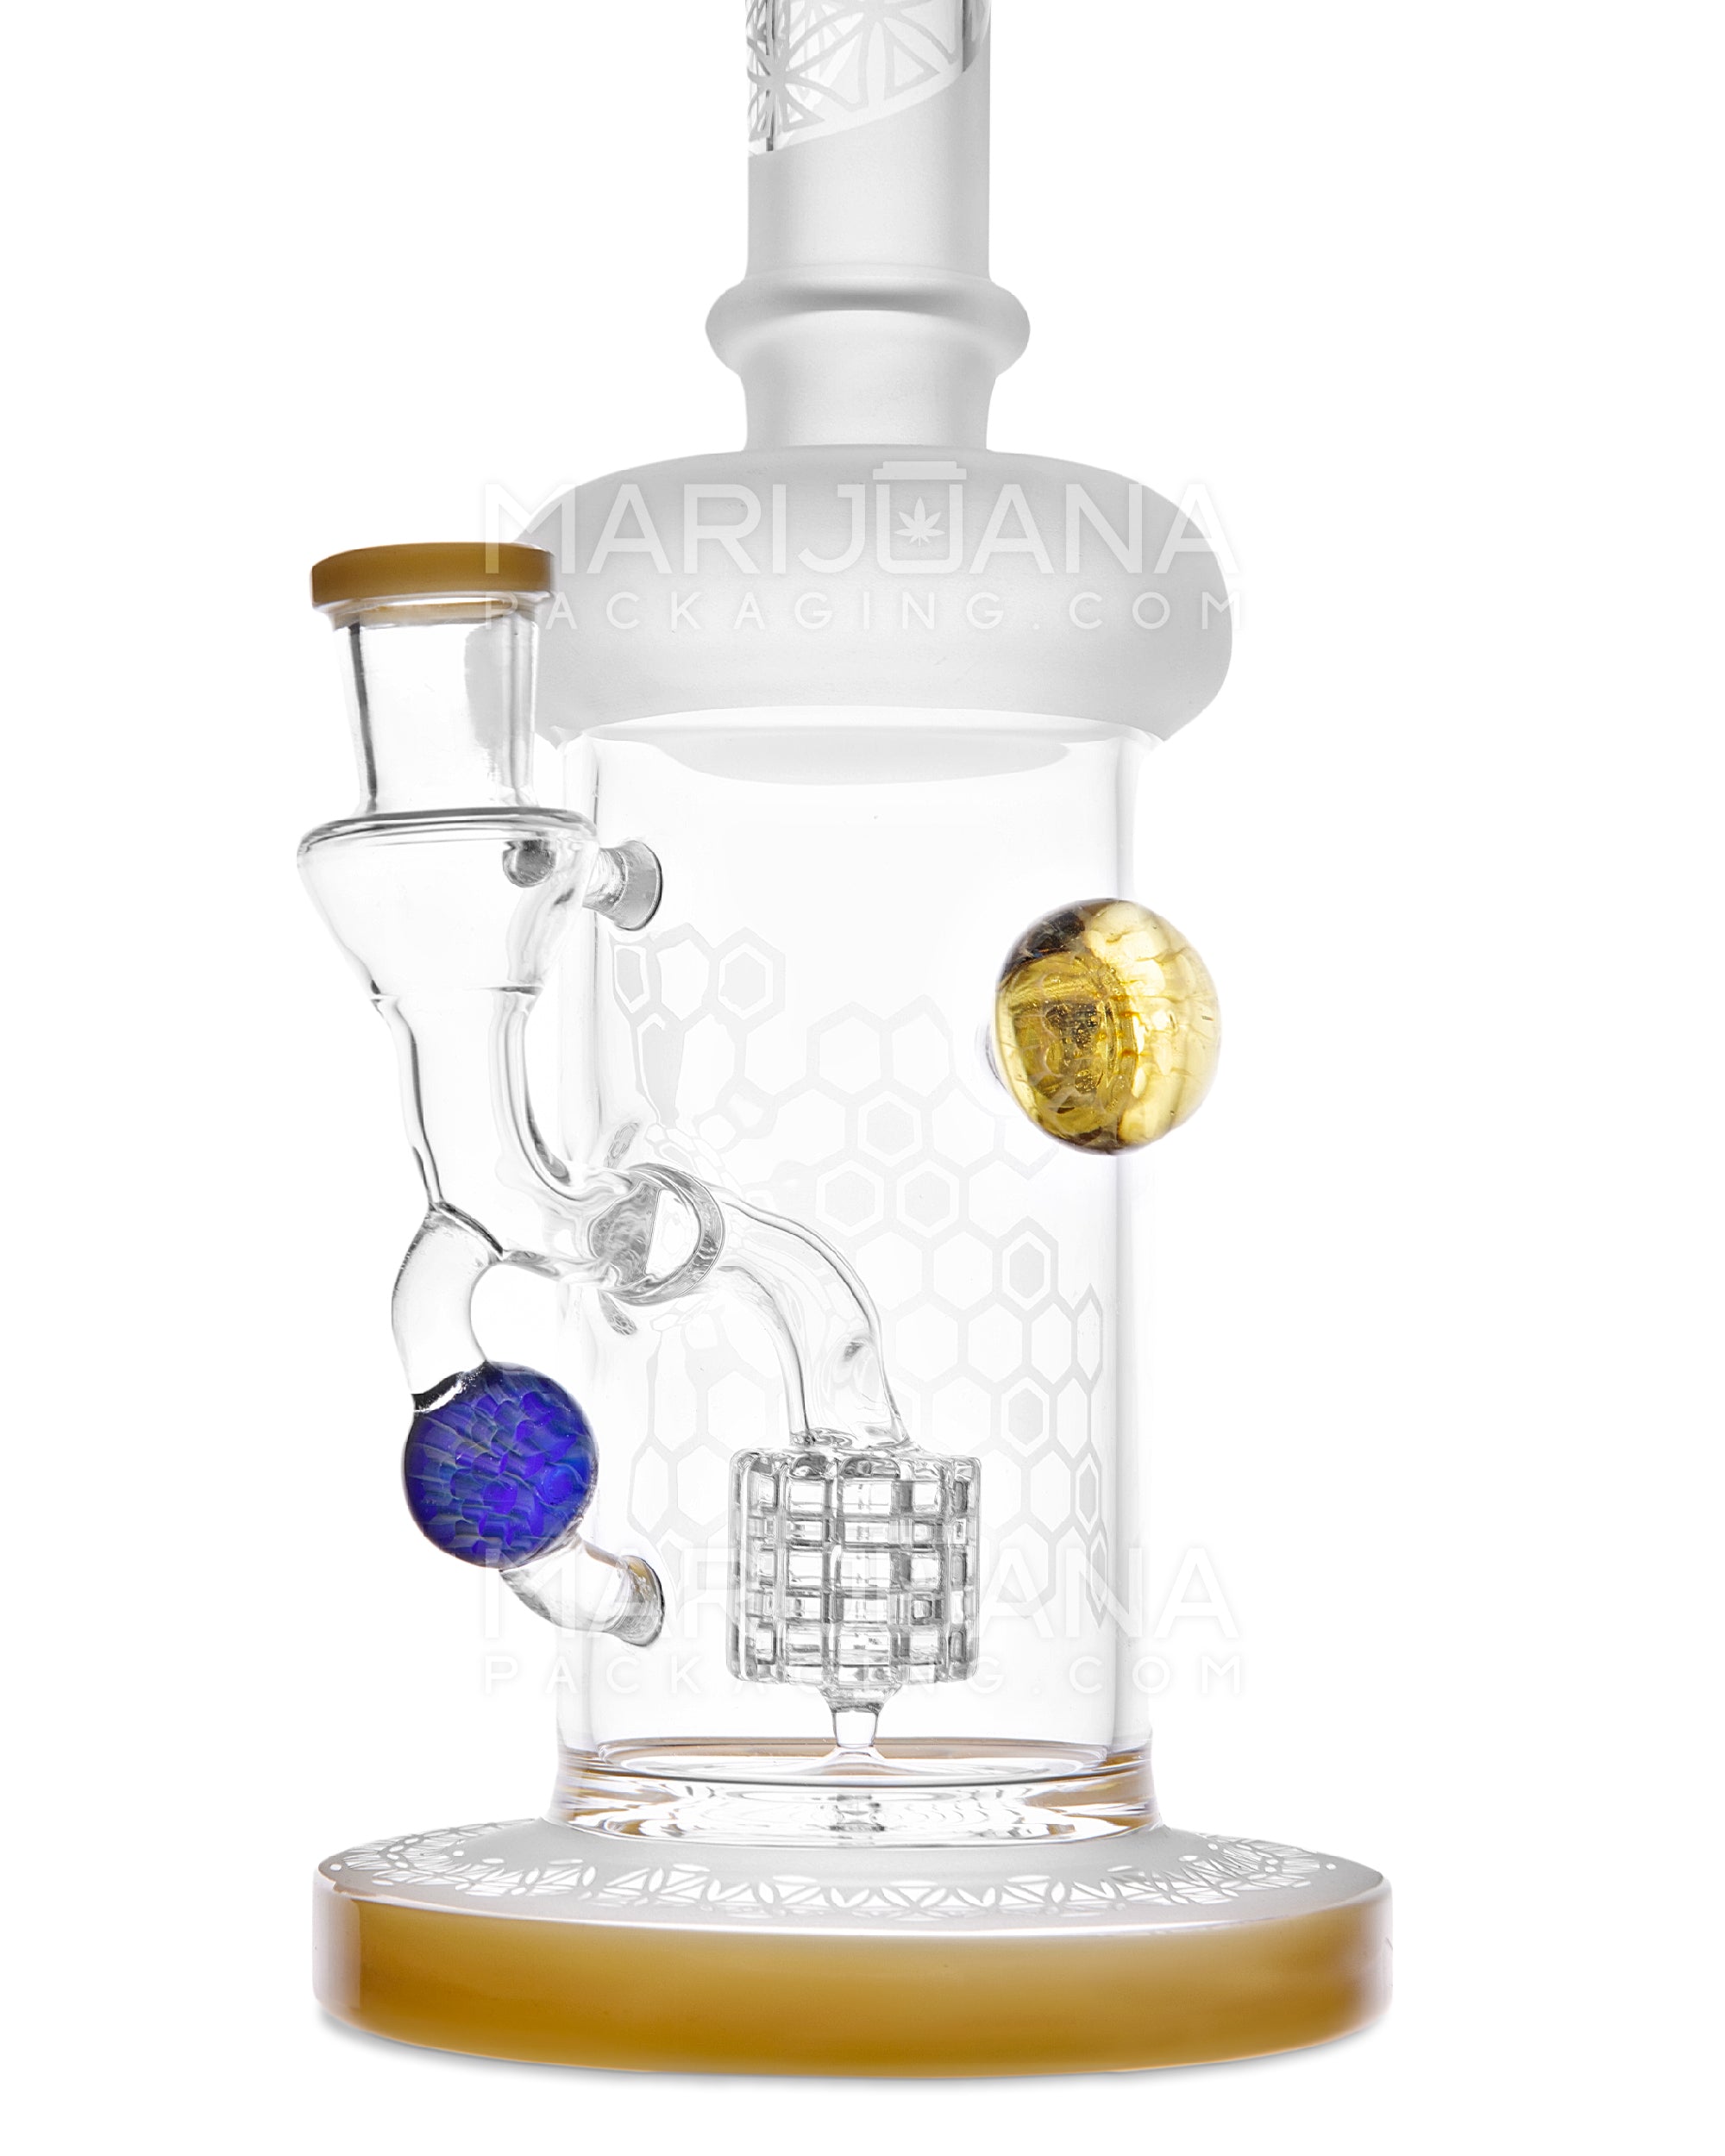 USA Glass | Straight Neck Matrix Perc Sandblasted Glass Water Pipe w/ Implosion Marbles | 11in Tall - 14mm Bowl - Yellow - 3